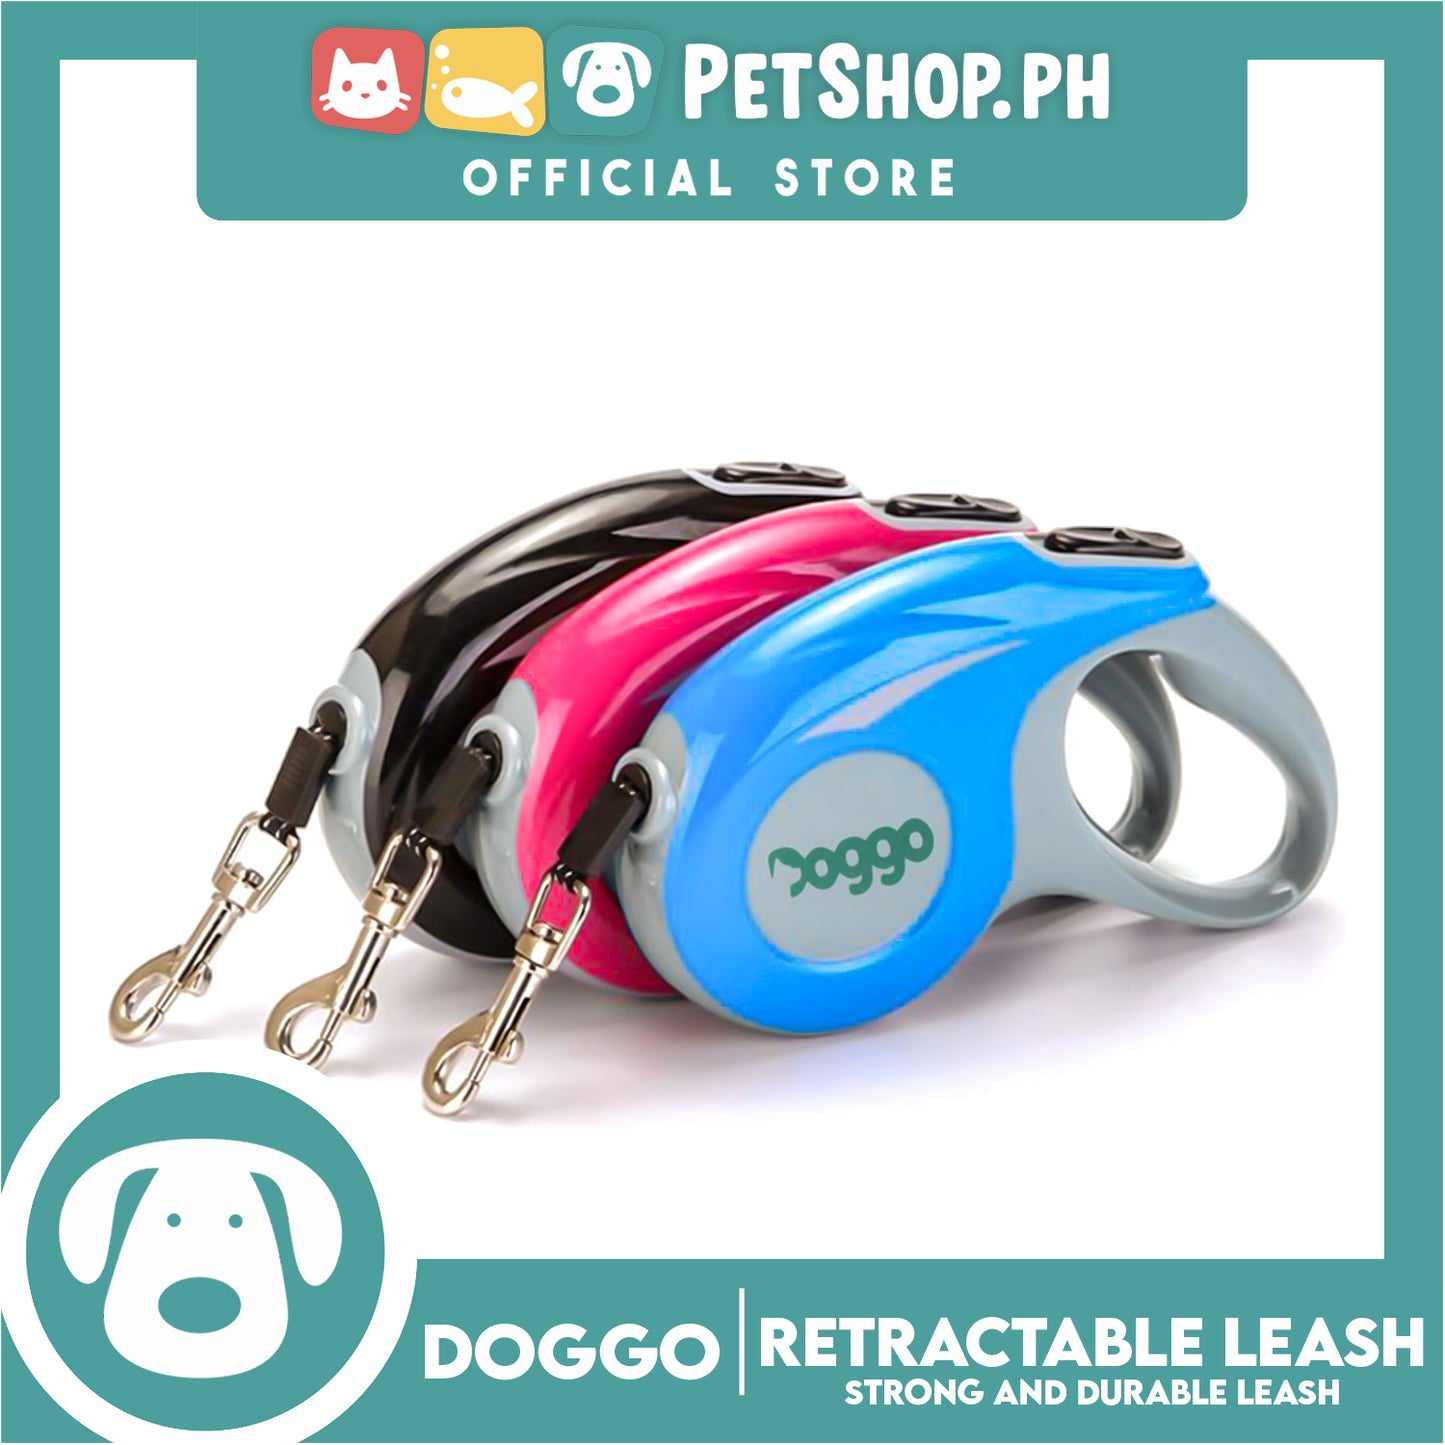 Doggo Retractable Leash 5M (Pink) Strong And Durable, In Comfort And Control Running And Convenient